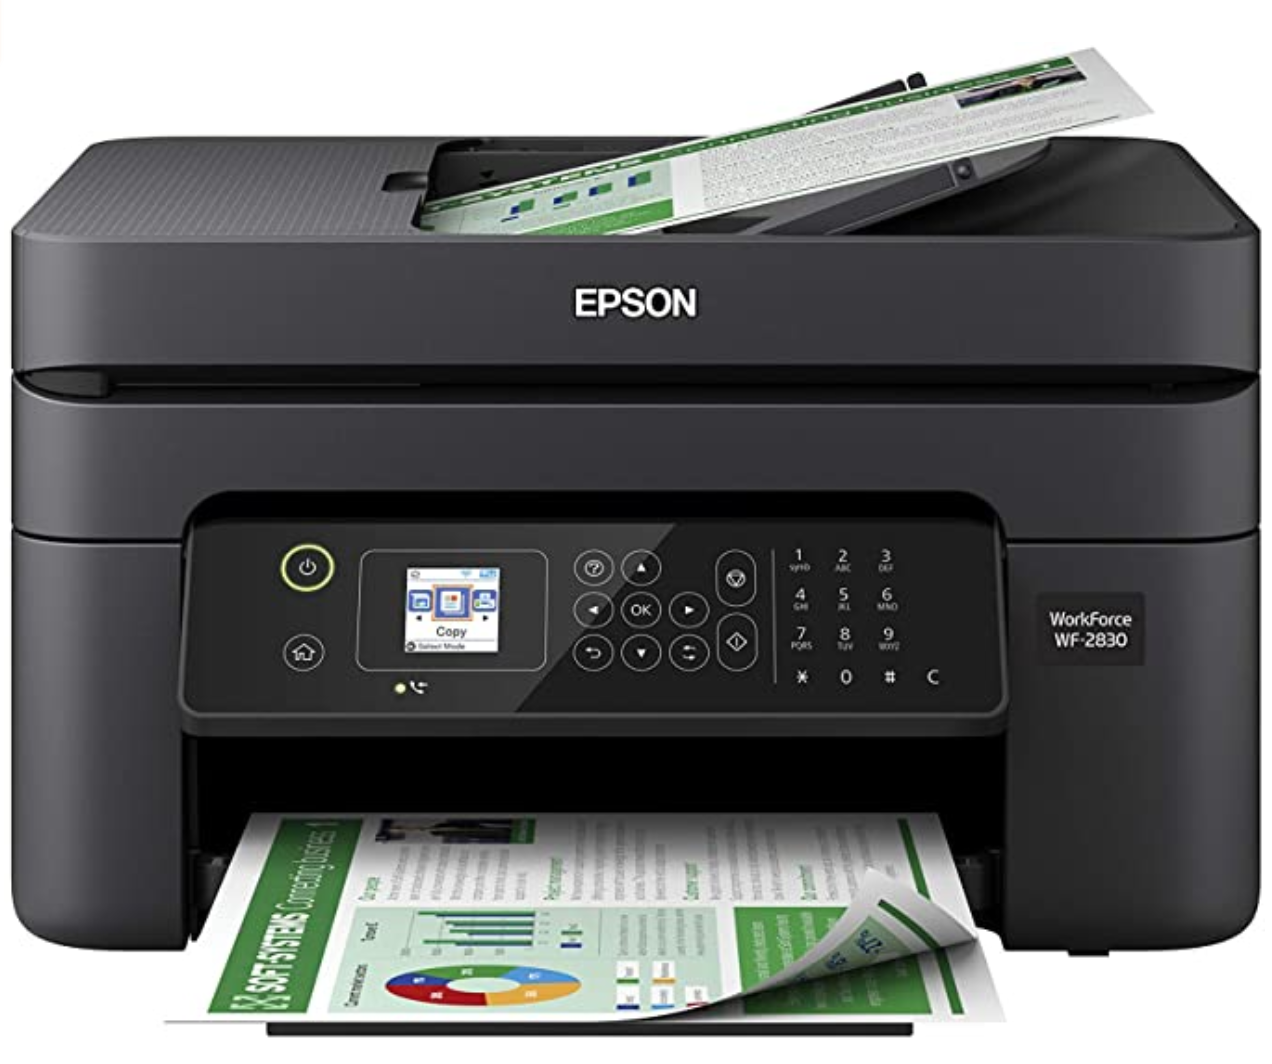 Epson Workforce WF-2830 All-in-One Wireless Color Printer with Scanner, Copier and Fax - image 1 of 1